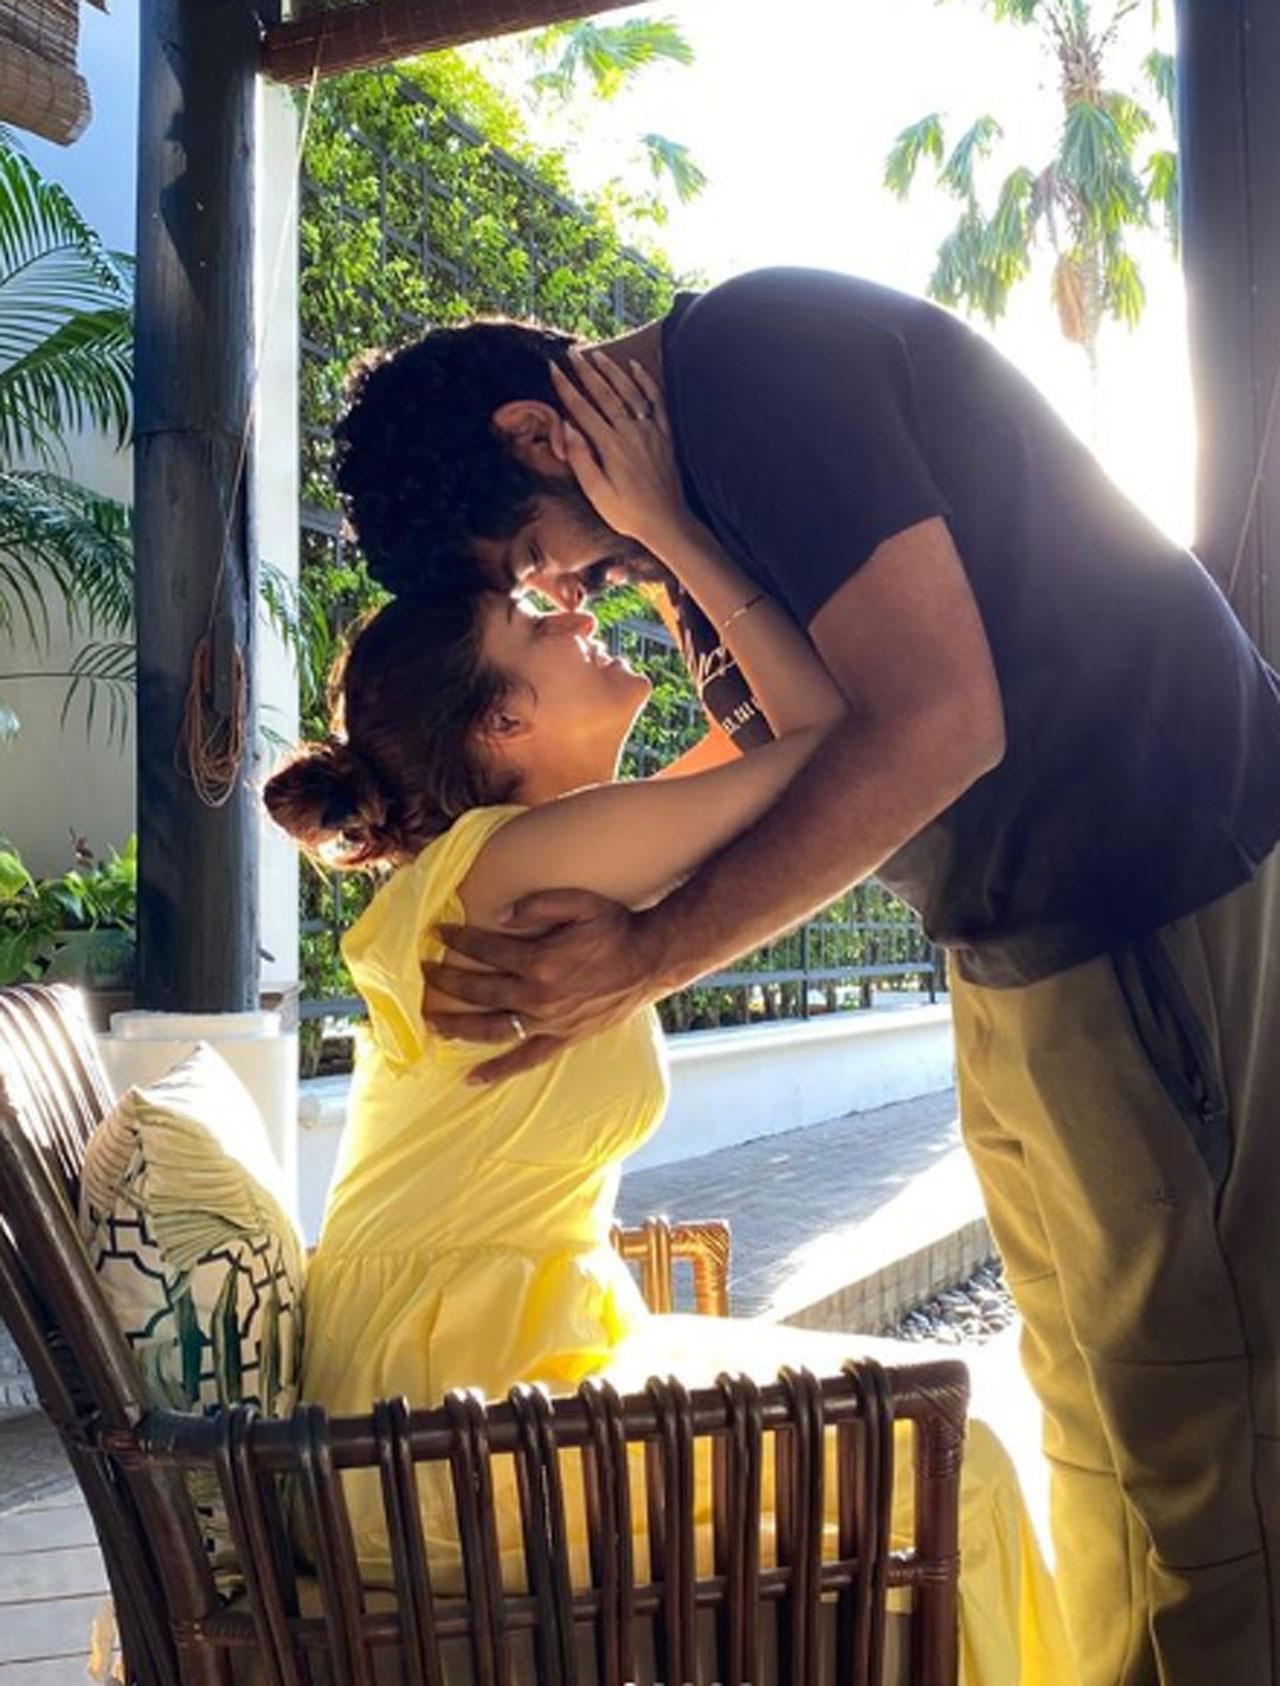 Nayanthara and Vignesh tied the knot in an intimate ceremony at a private resort in Mahabalipuram. The ceremony was attended by close friends and family. Only a few celebrities were invited. Rajnikanth, Shah Rukh Khan, and Director Atlee were some of the few celebrities spotted at the wedding